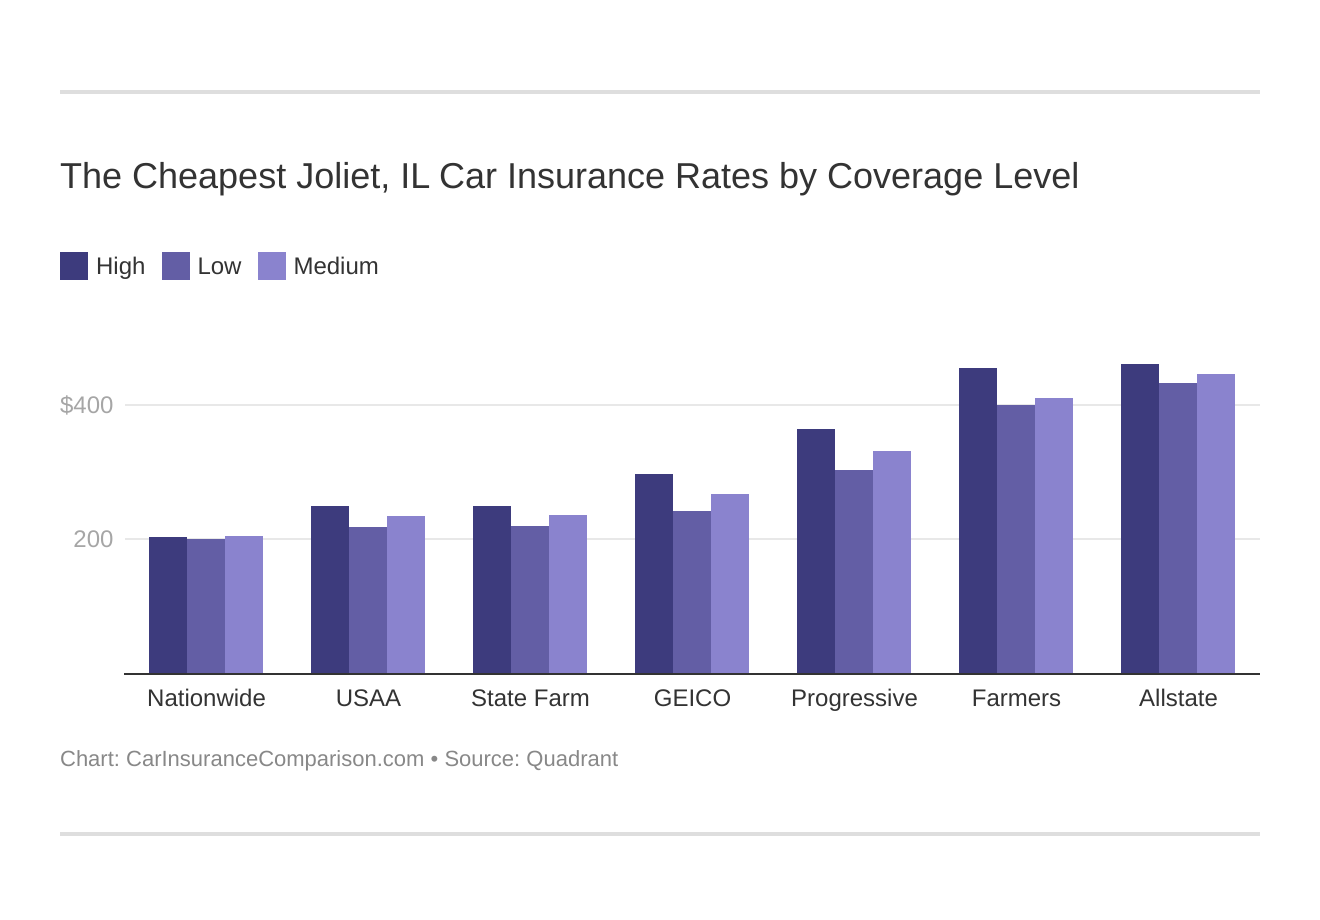 The Cheapest Joliet, IL Car Insurance Rates by Coverage Level